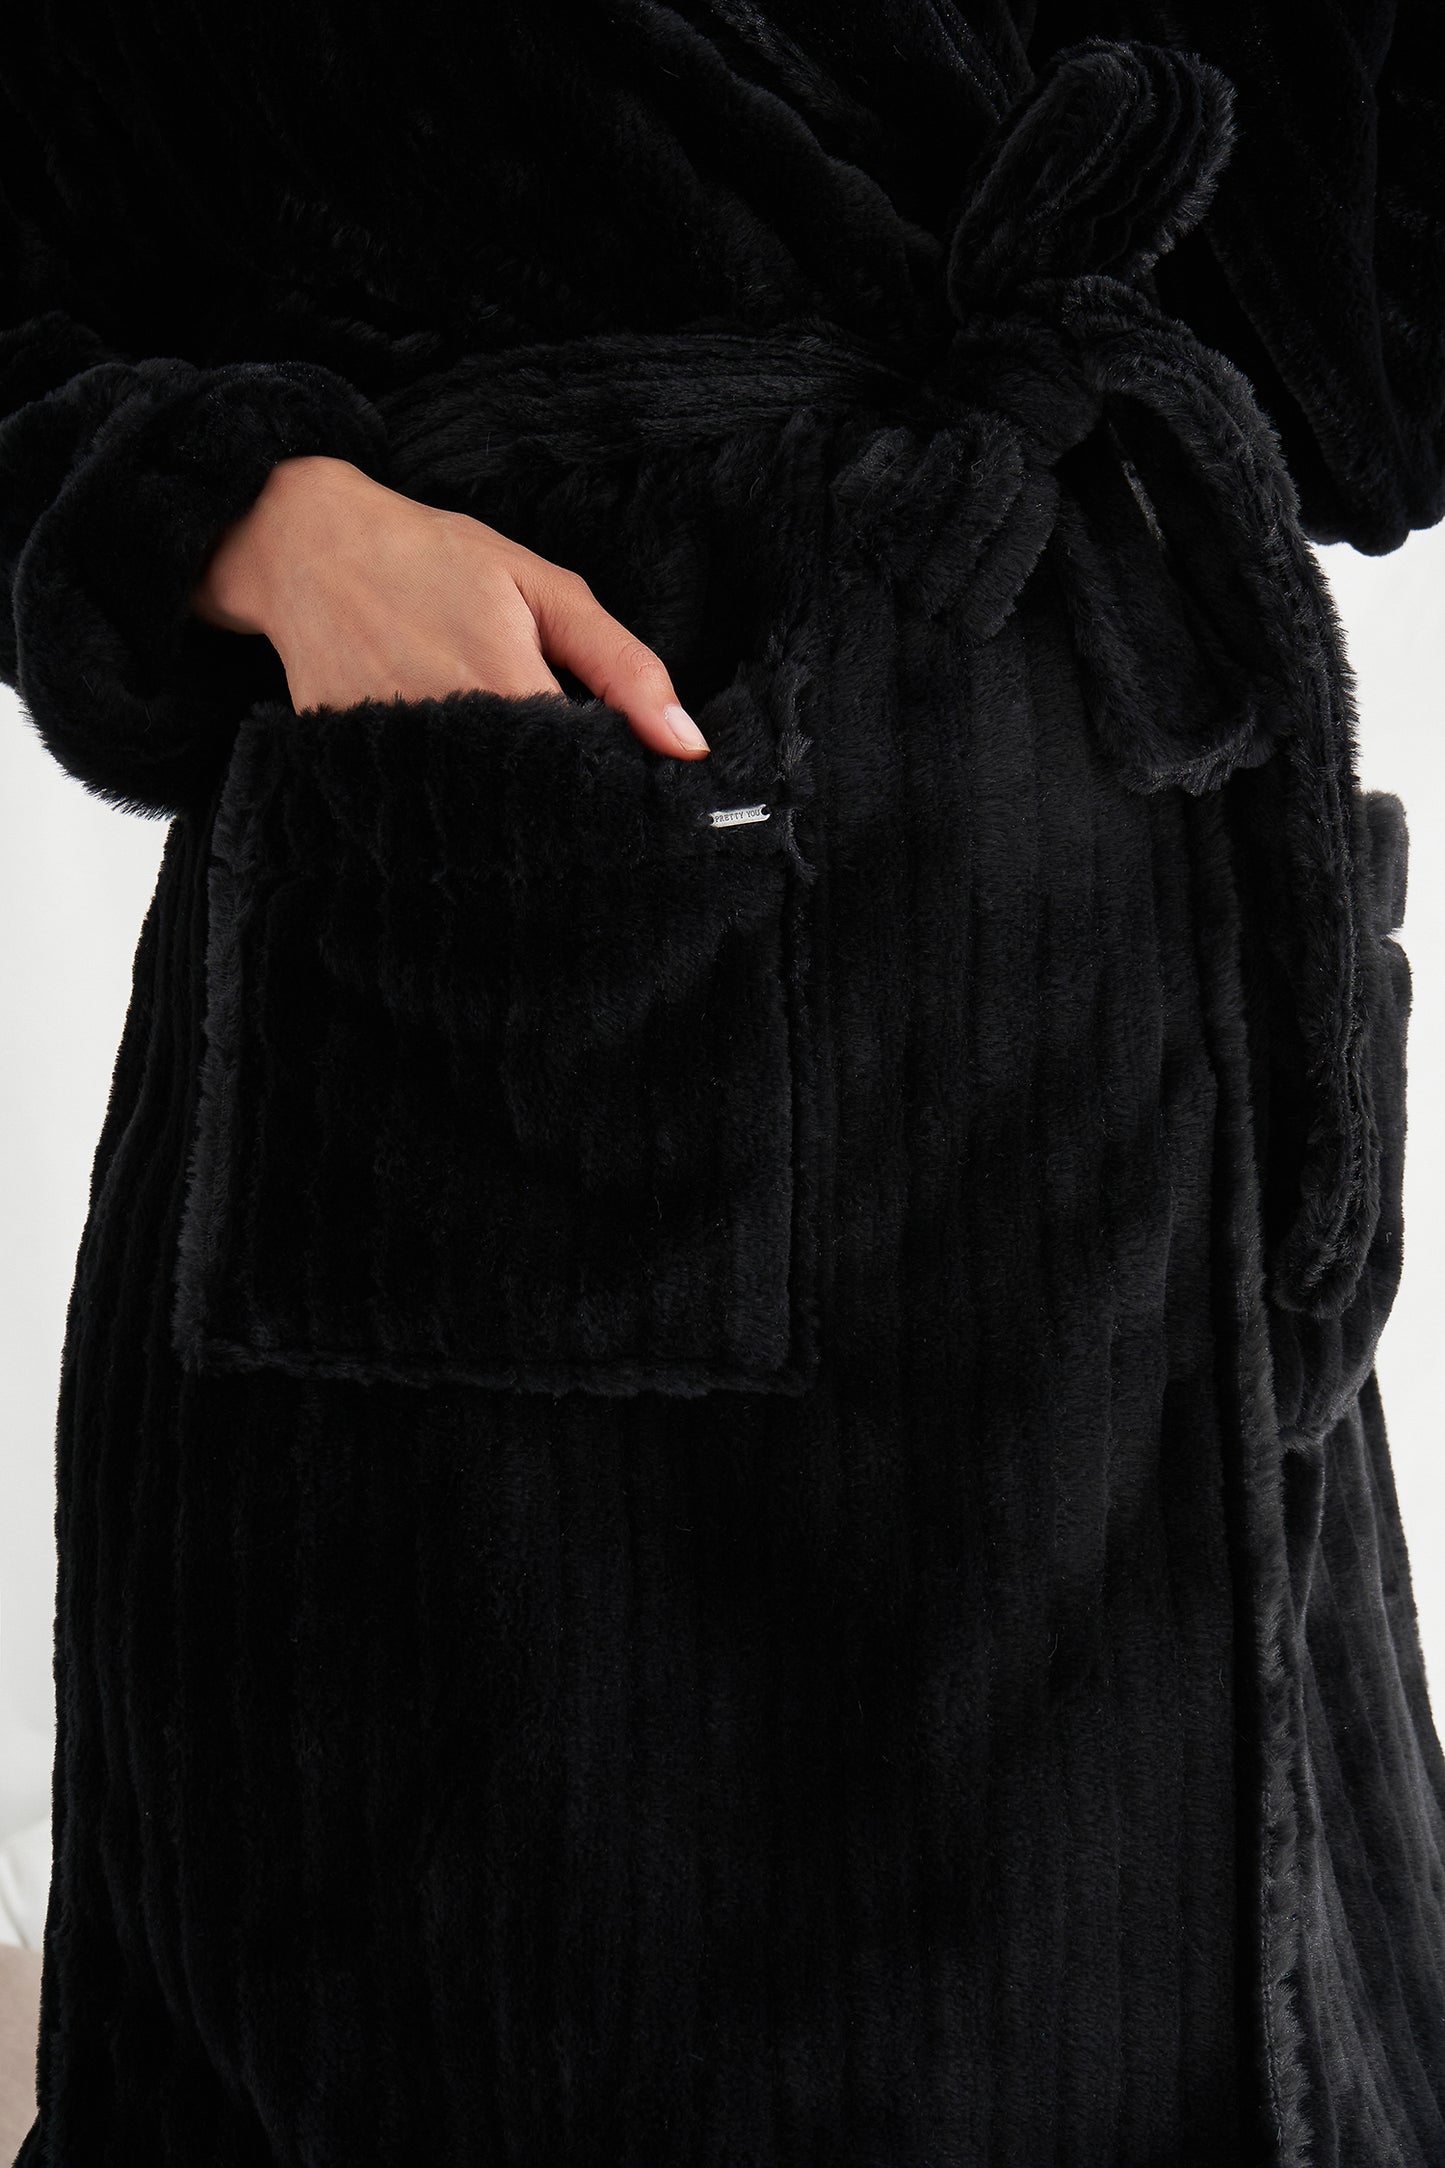 Women's Cloud Robe Dressing Gown in Black with oversized hood from Pretty You London